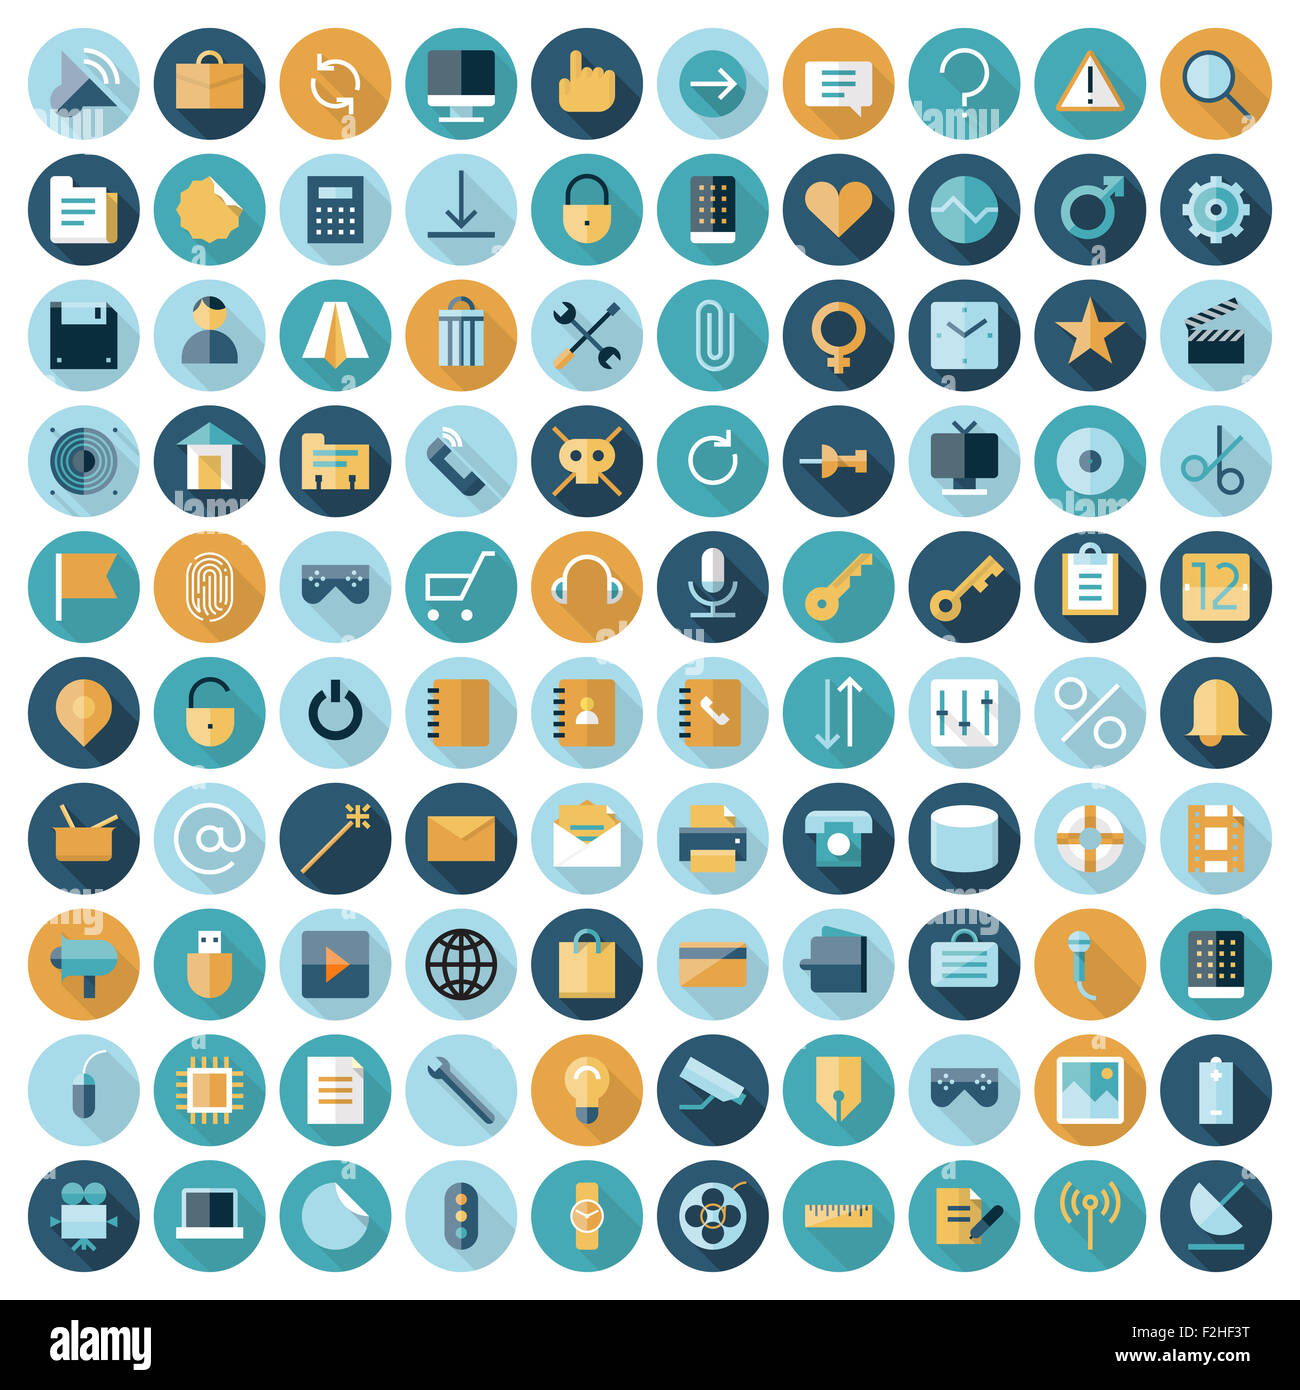 Flat design icons for user interface. Stock Photo